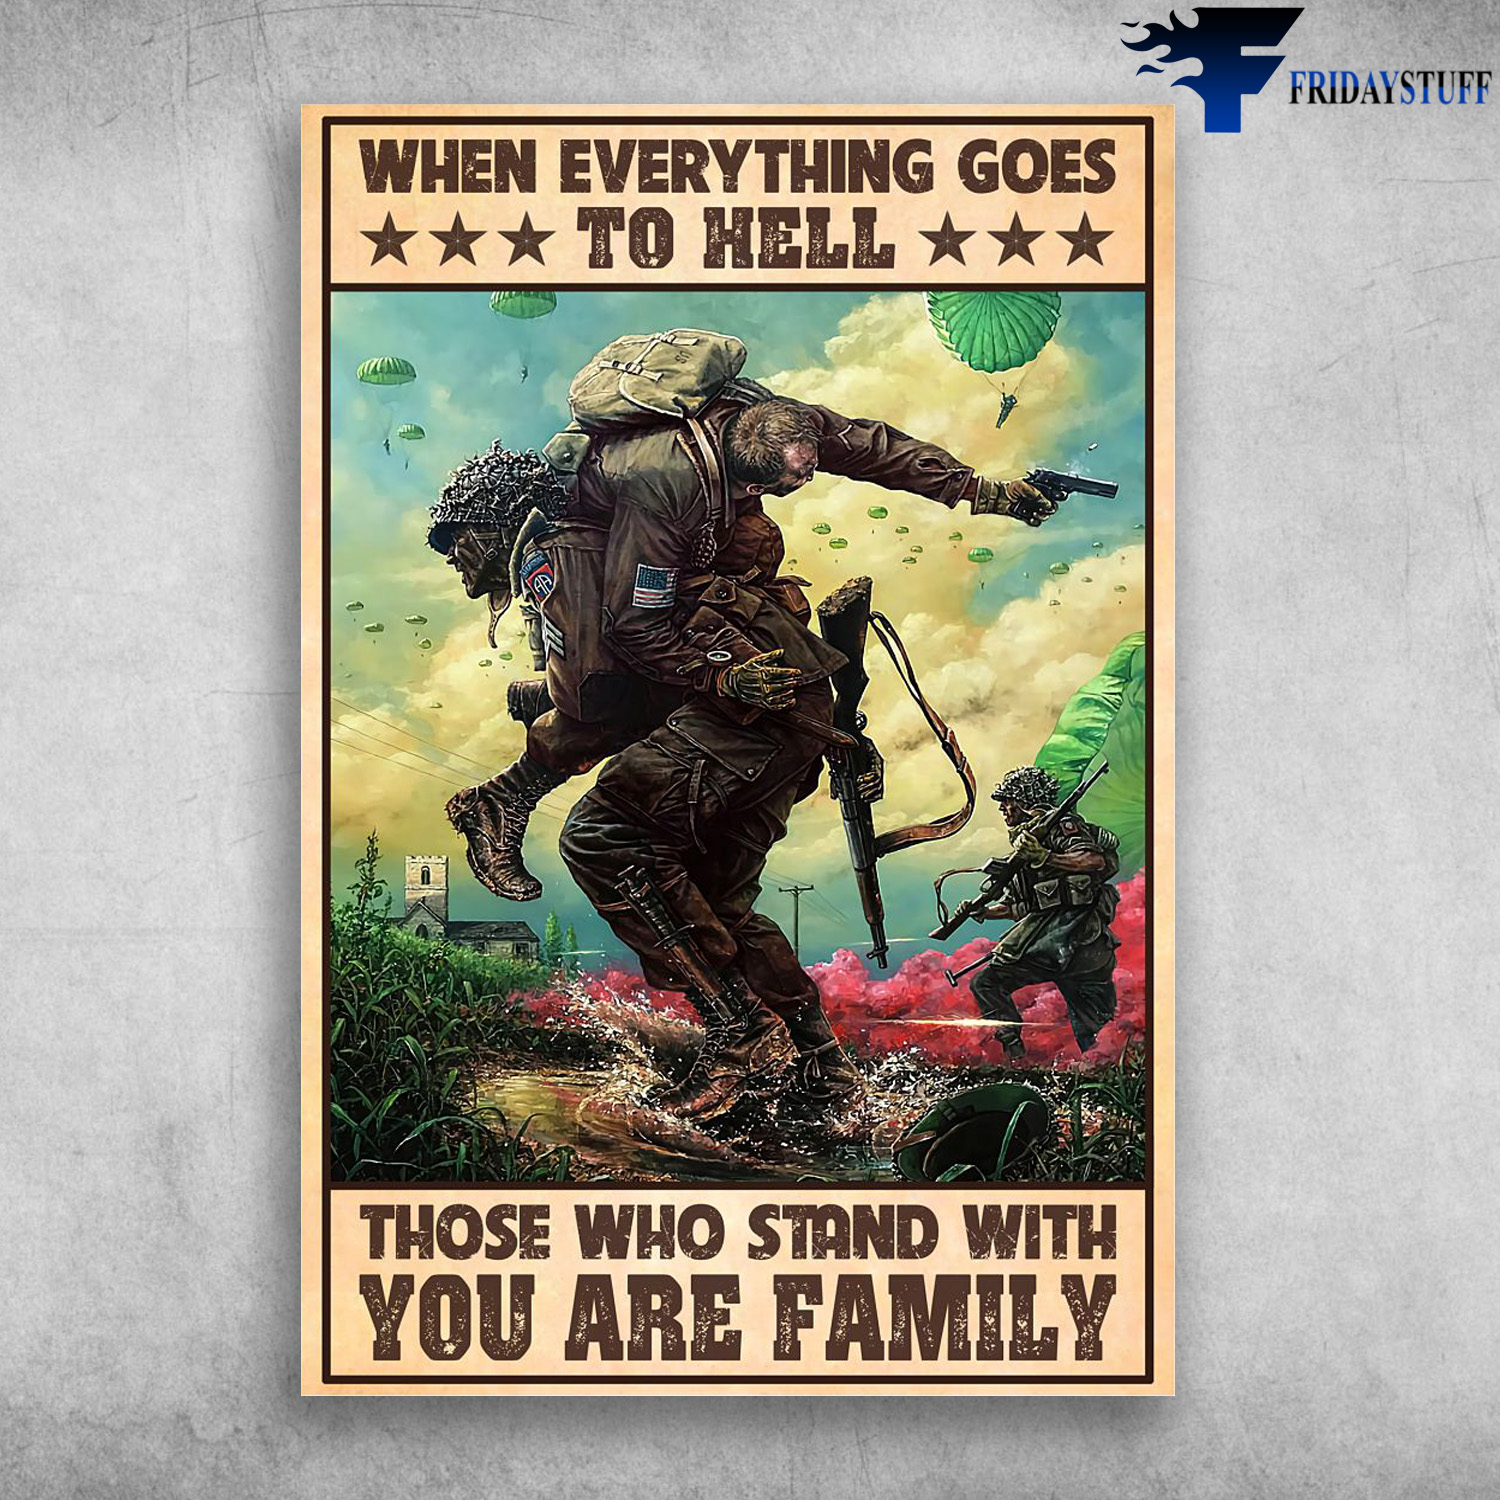 Soldier In The War - When Everything Goes To Hell, Those Who Stand With You Are Family